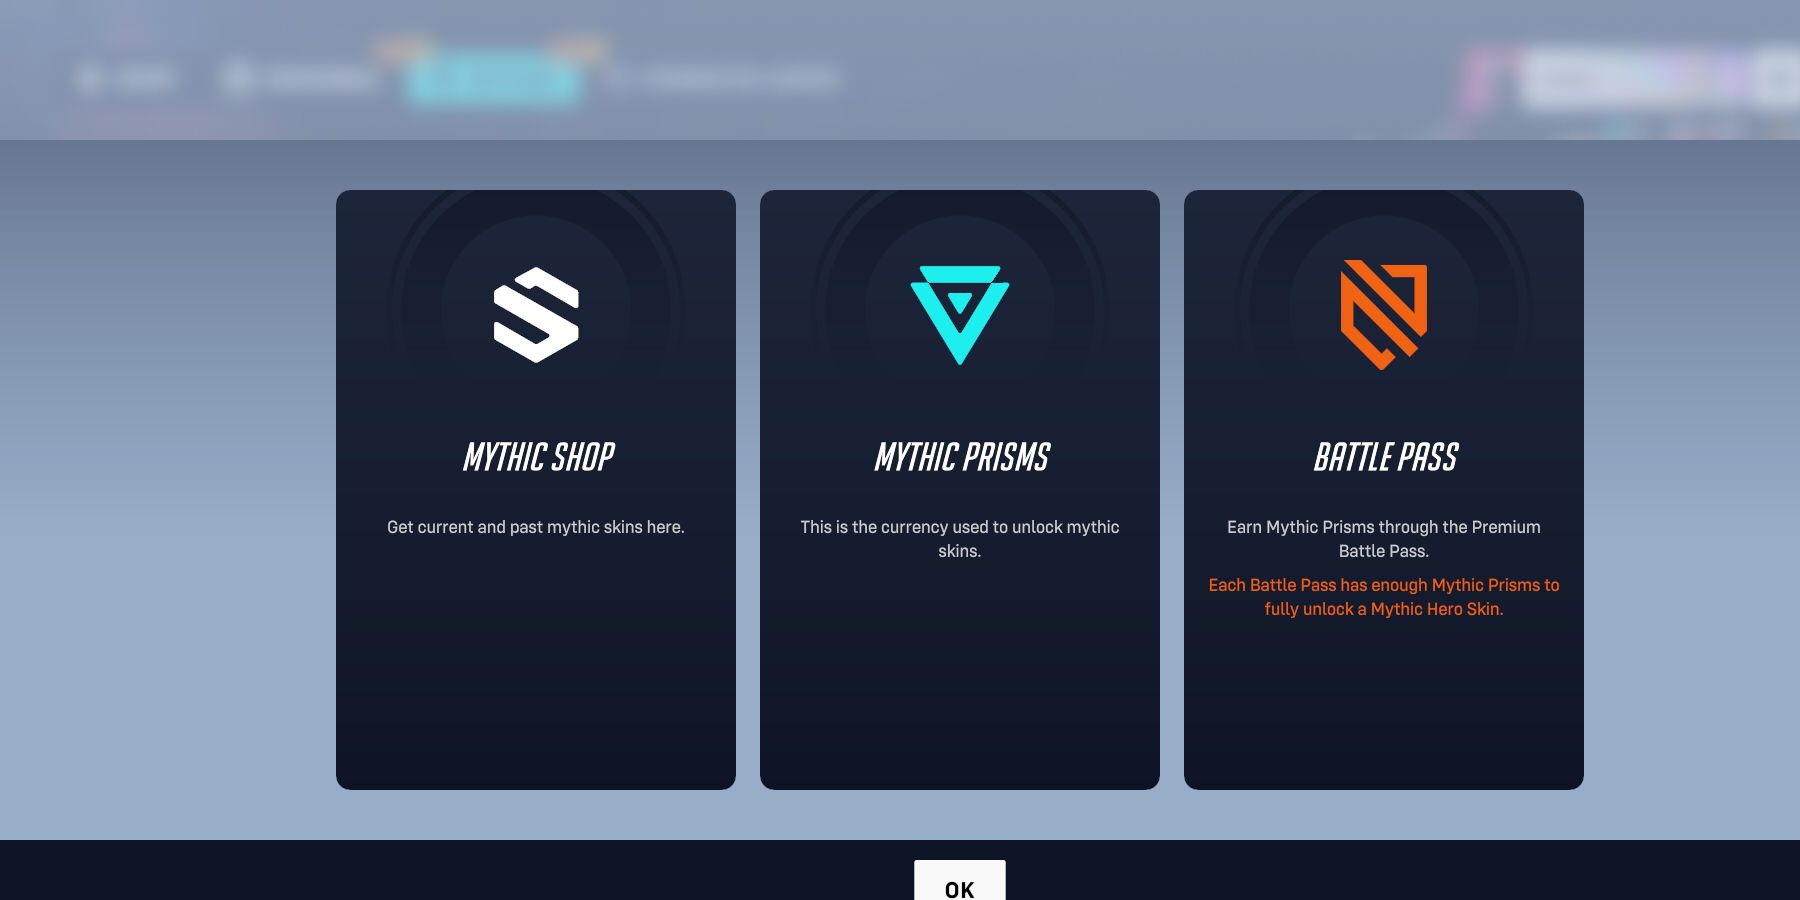 mythic shop and mythic prisms explained in Overwatch 2